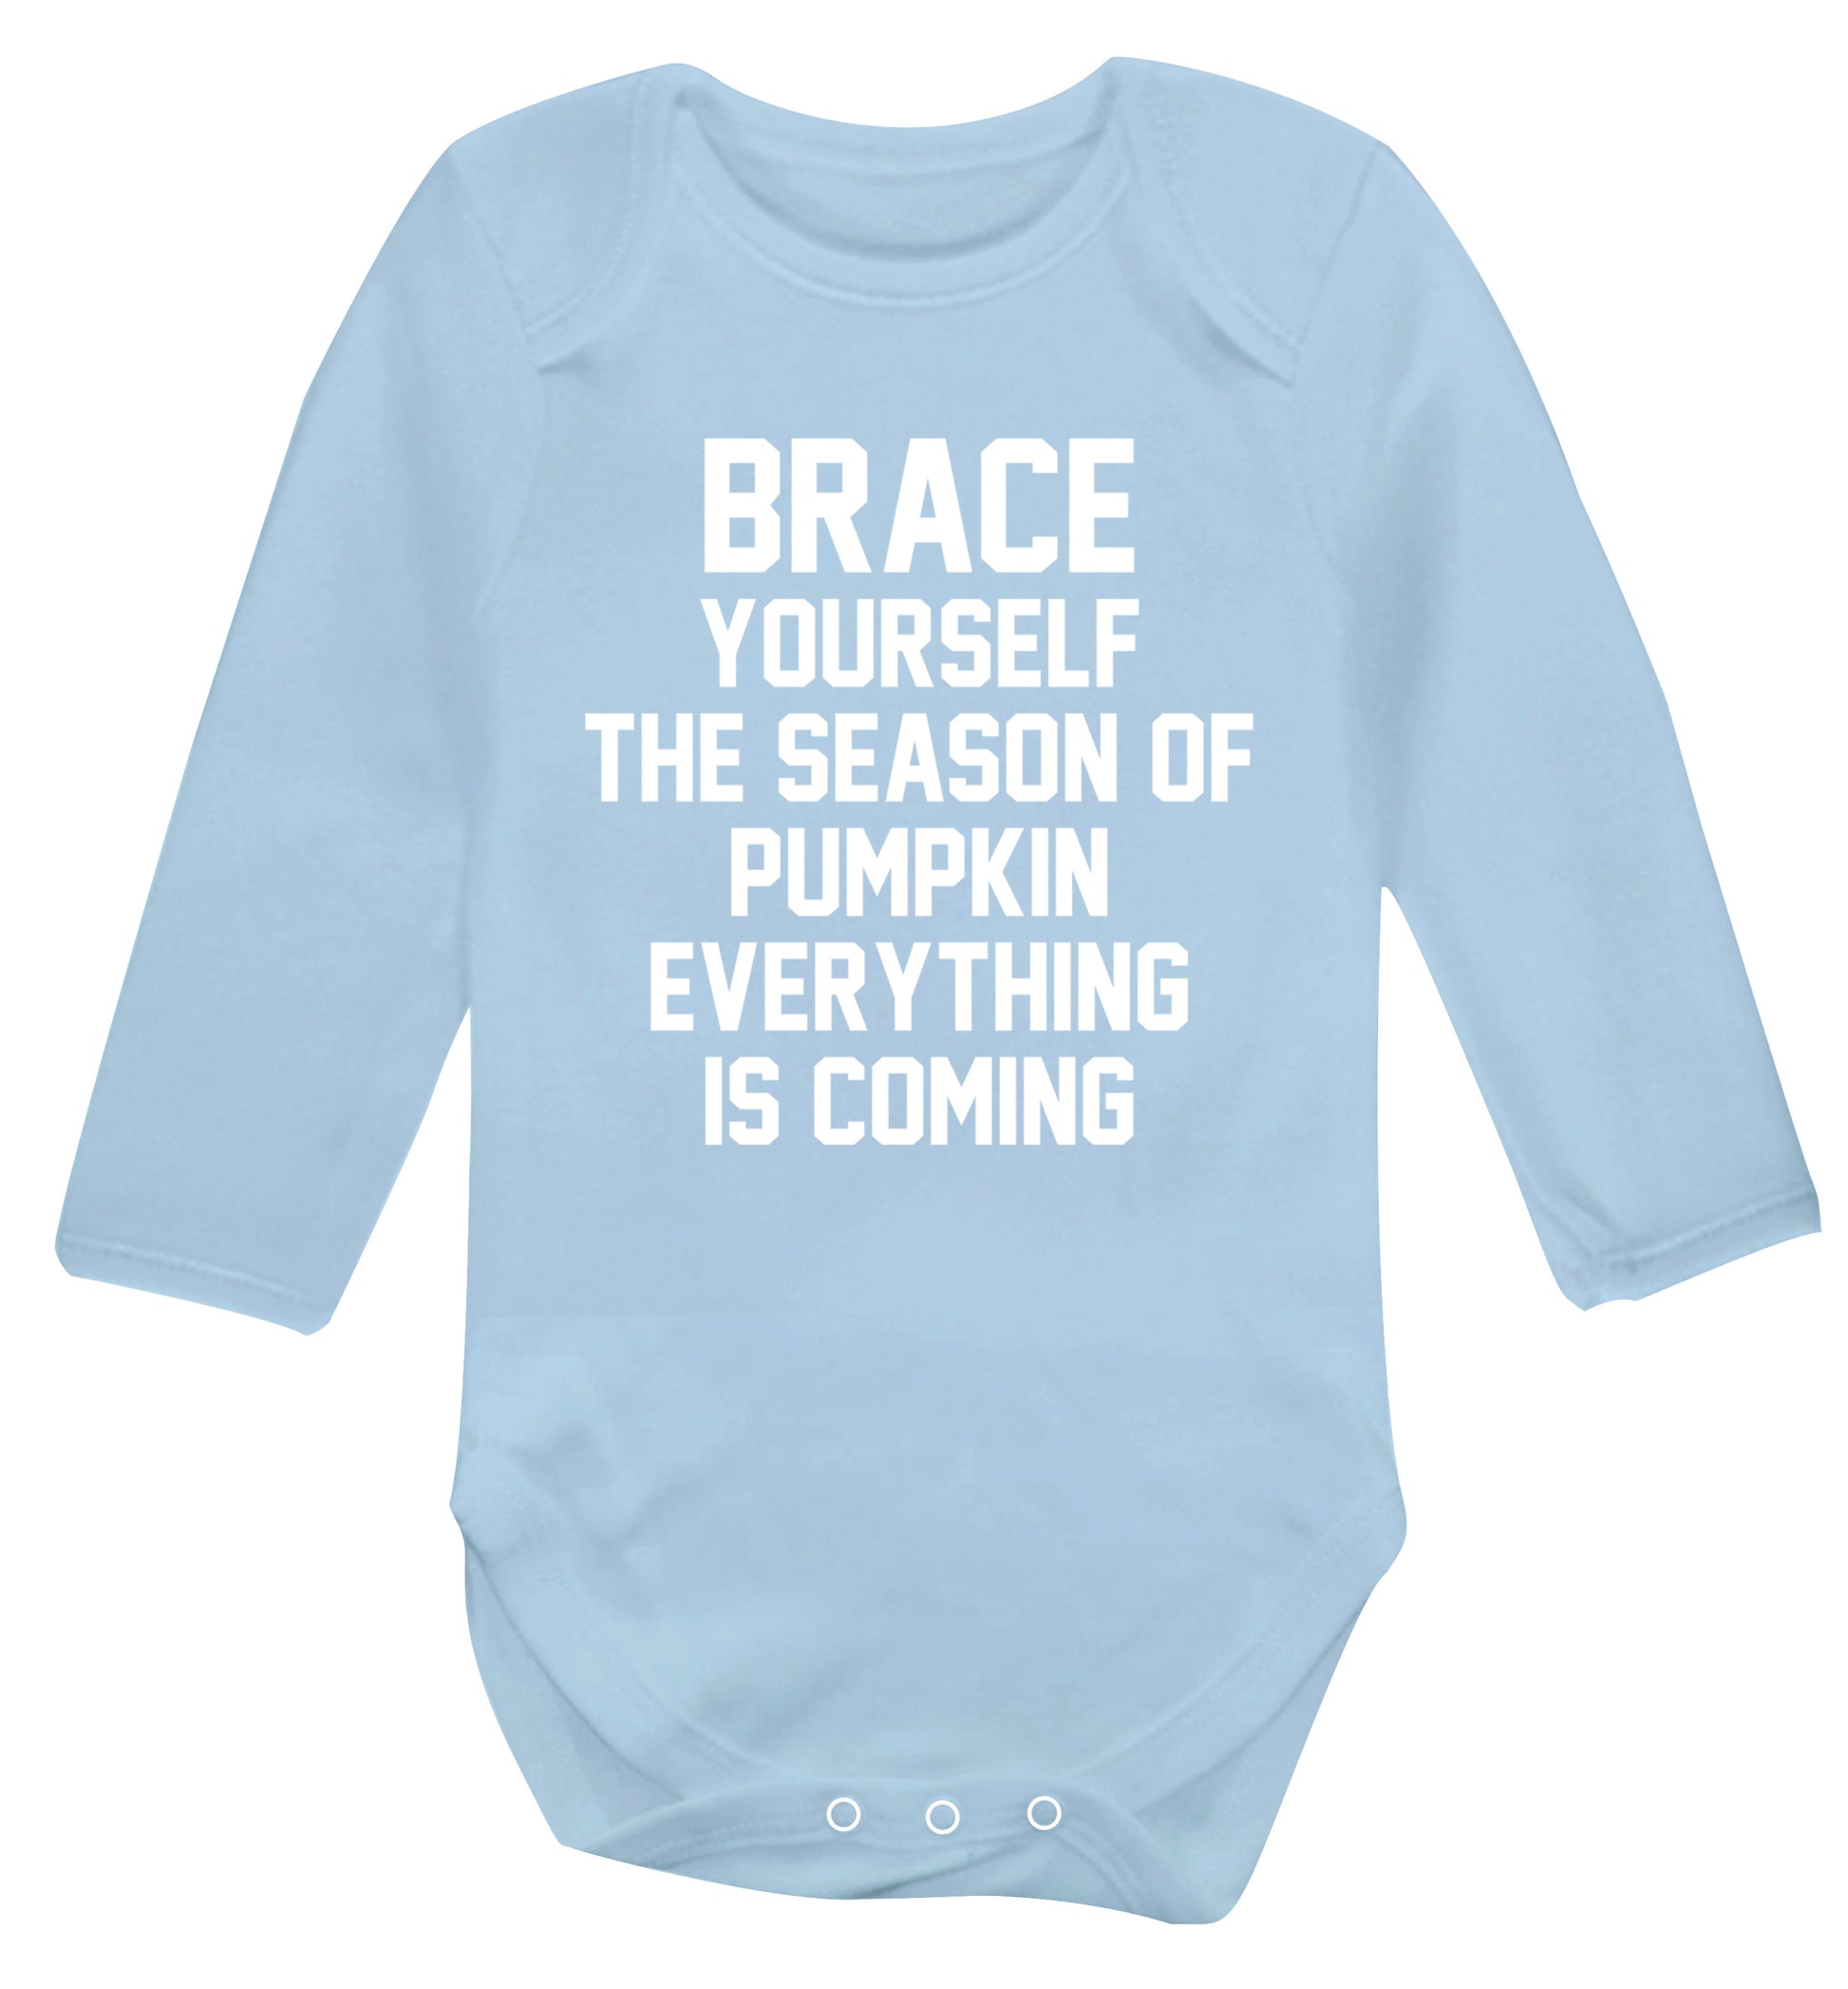 Brace yourself the season of pumpkin everything is coming Baby Vest long sleeved pale blue 6-12 months